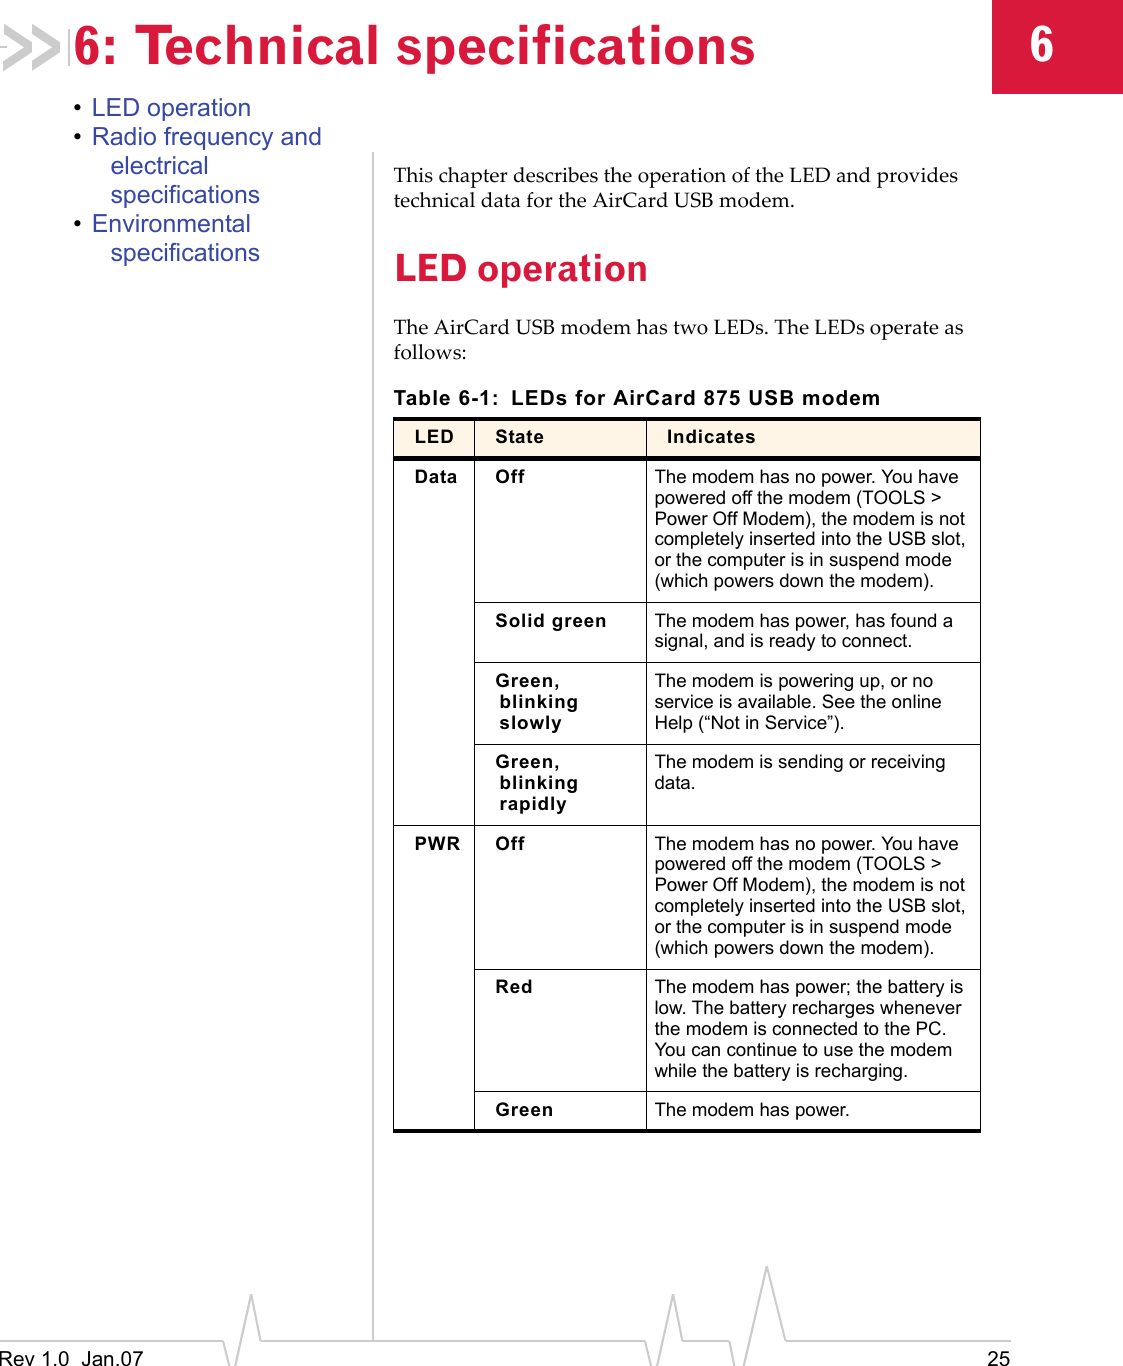 Rev 1.0  Jan.07 2566: Technical specifications•LED operation•Radio frequency and electrical specifications•Environmental specificationsThischapterdescribestheoperationoftheLEDandprovidestechnicaldatafortheAirCardUSBmodem.LED operationTheAirCardUSBmodemhastwoLEDs.TheLEDsoperateasfollows:Table 6-1: LEDs for AirCard 875 USB modemLED State IndicatesData Off The modem has no power. You have powered off the modem (TOOLS &gt; Power Off Modem), the modem is not completely inserted into the USB slot, or the computer is in suspend mode (which powers down the modem).Solid green The modem has power, has found a signal, and is ready to connect. Green,blinking slowlyThe modem is powering up, or no service is available. See the online Help (“Not in Service”). Green,blinking rapidlyThe modem is sending or receiving data. PWR Off The modem has no power. You have powered off the modem (TOOLS &gt; Power Off Modem), the modem is not completely inserted into the USB slot, or the computer is in suspend mode (which powers down the modem). Red The modem has power; the battery is low. The battery recharges whenever the modem is connected to the PC. You can continue to use the modem while the battery is recharging. Green The modem has power.